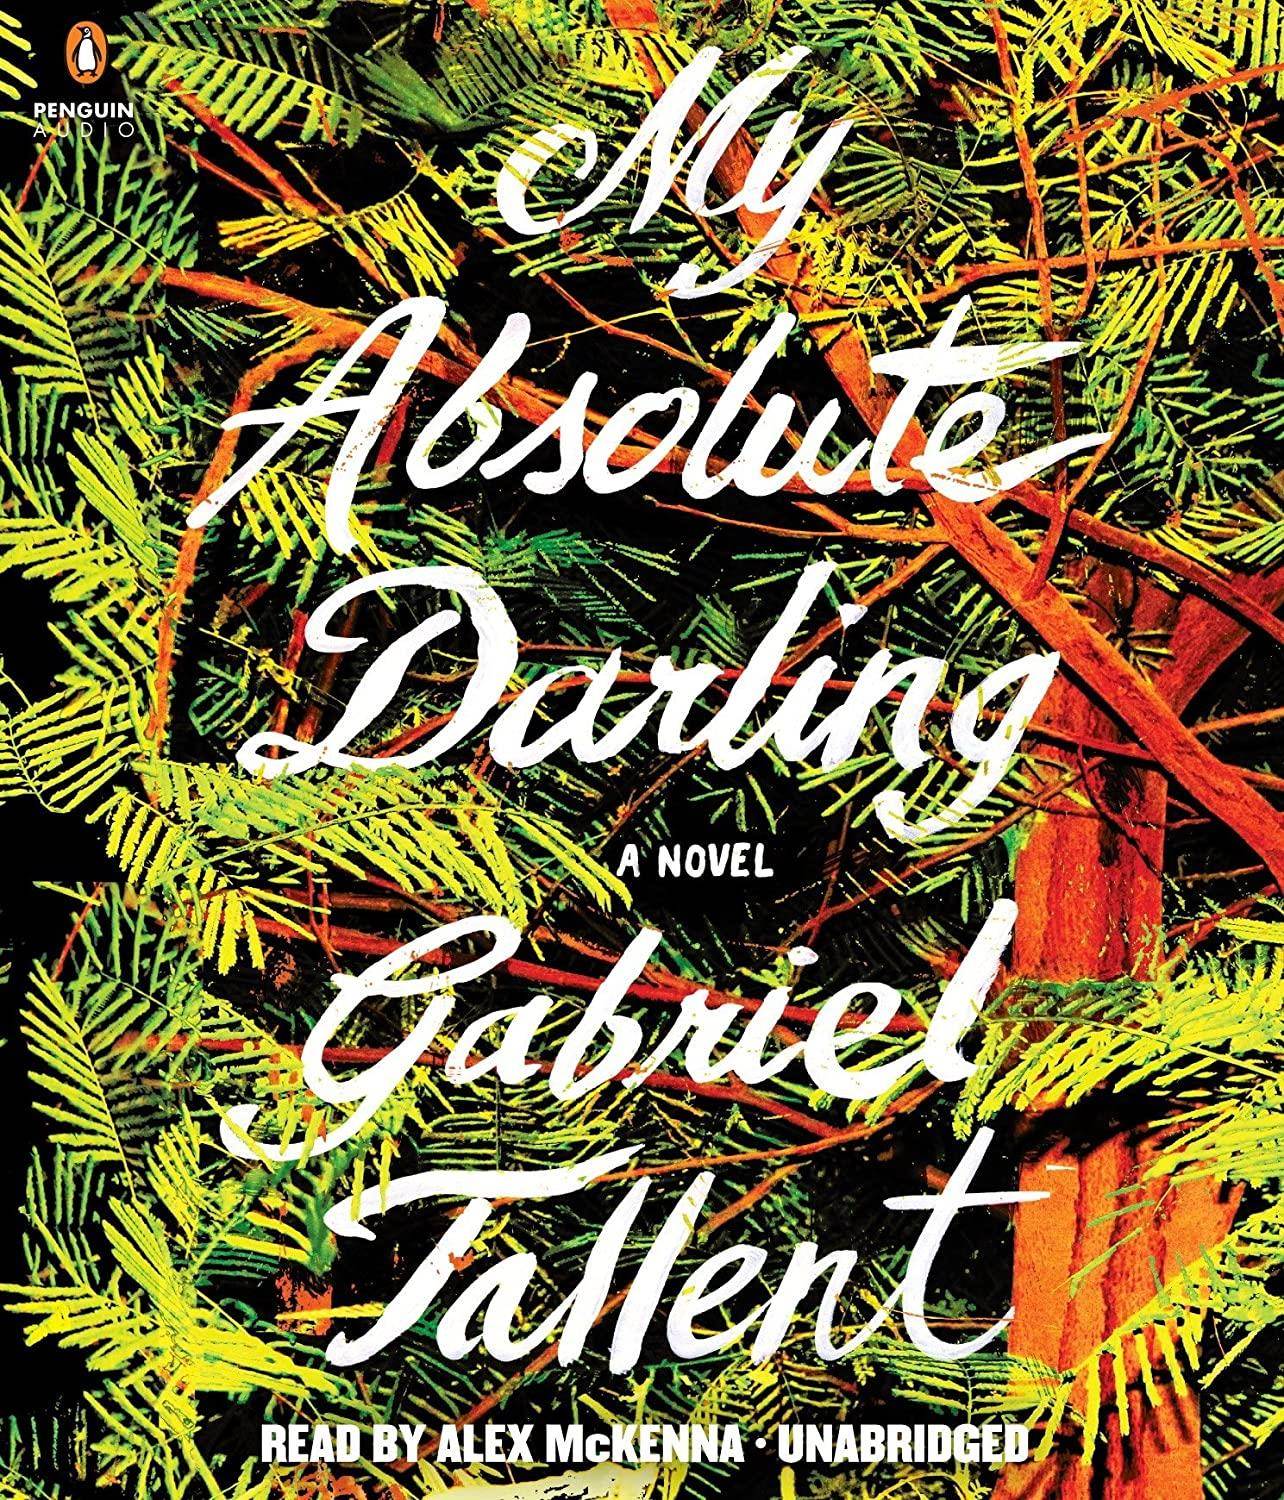 My Absolute Darling: A Novel